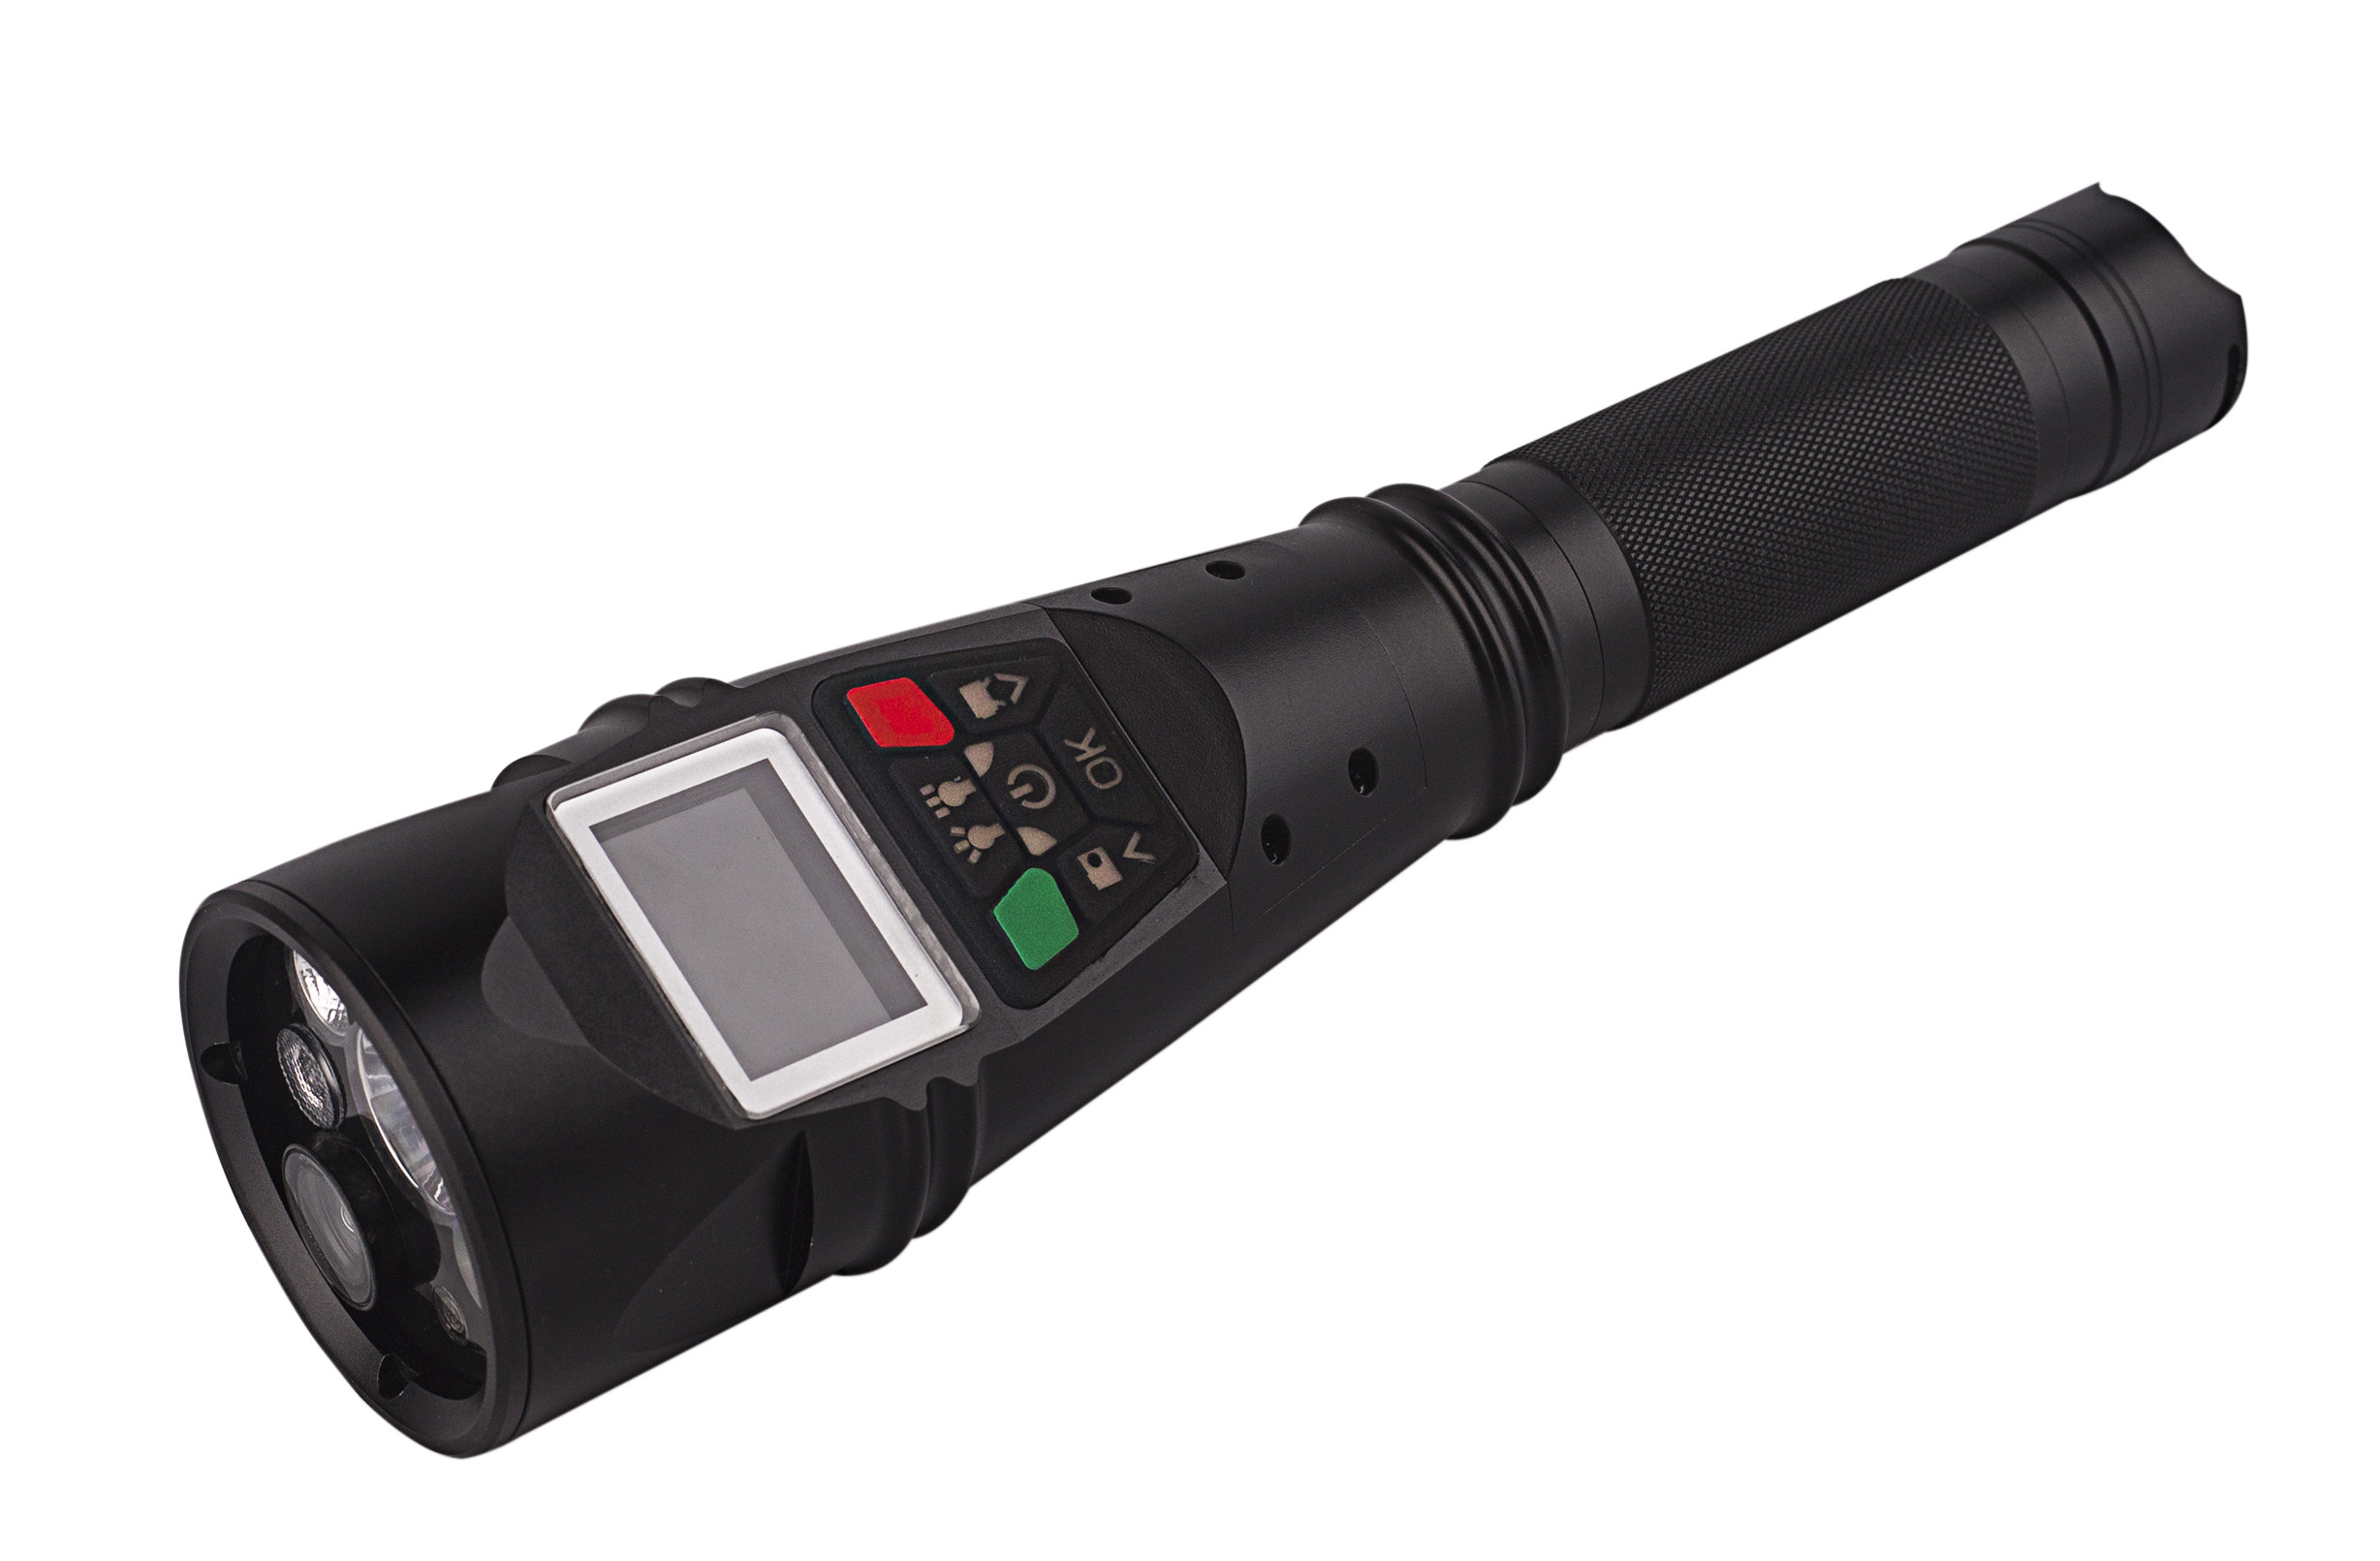  IP66 Rechargeable LED Camera Flashlight HD 1080P Digital Video Recording Torch Manufactures